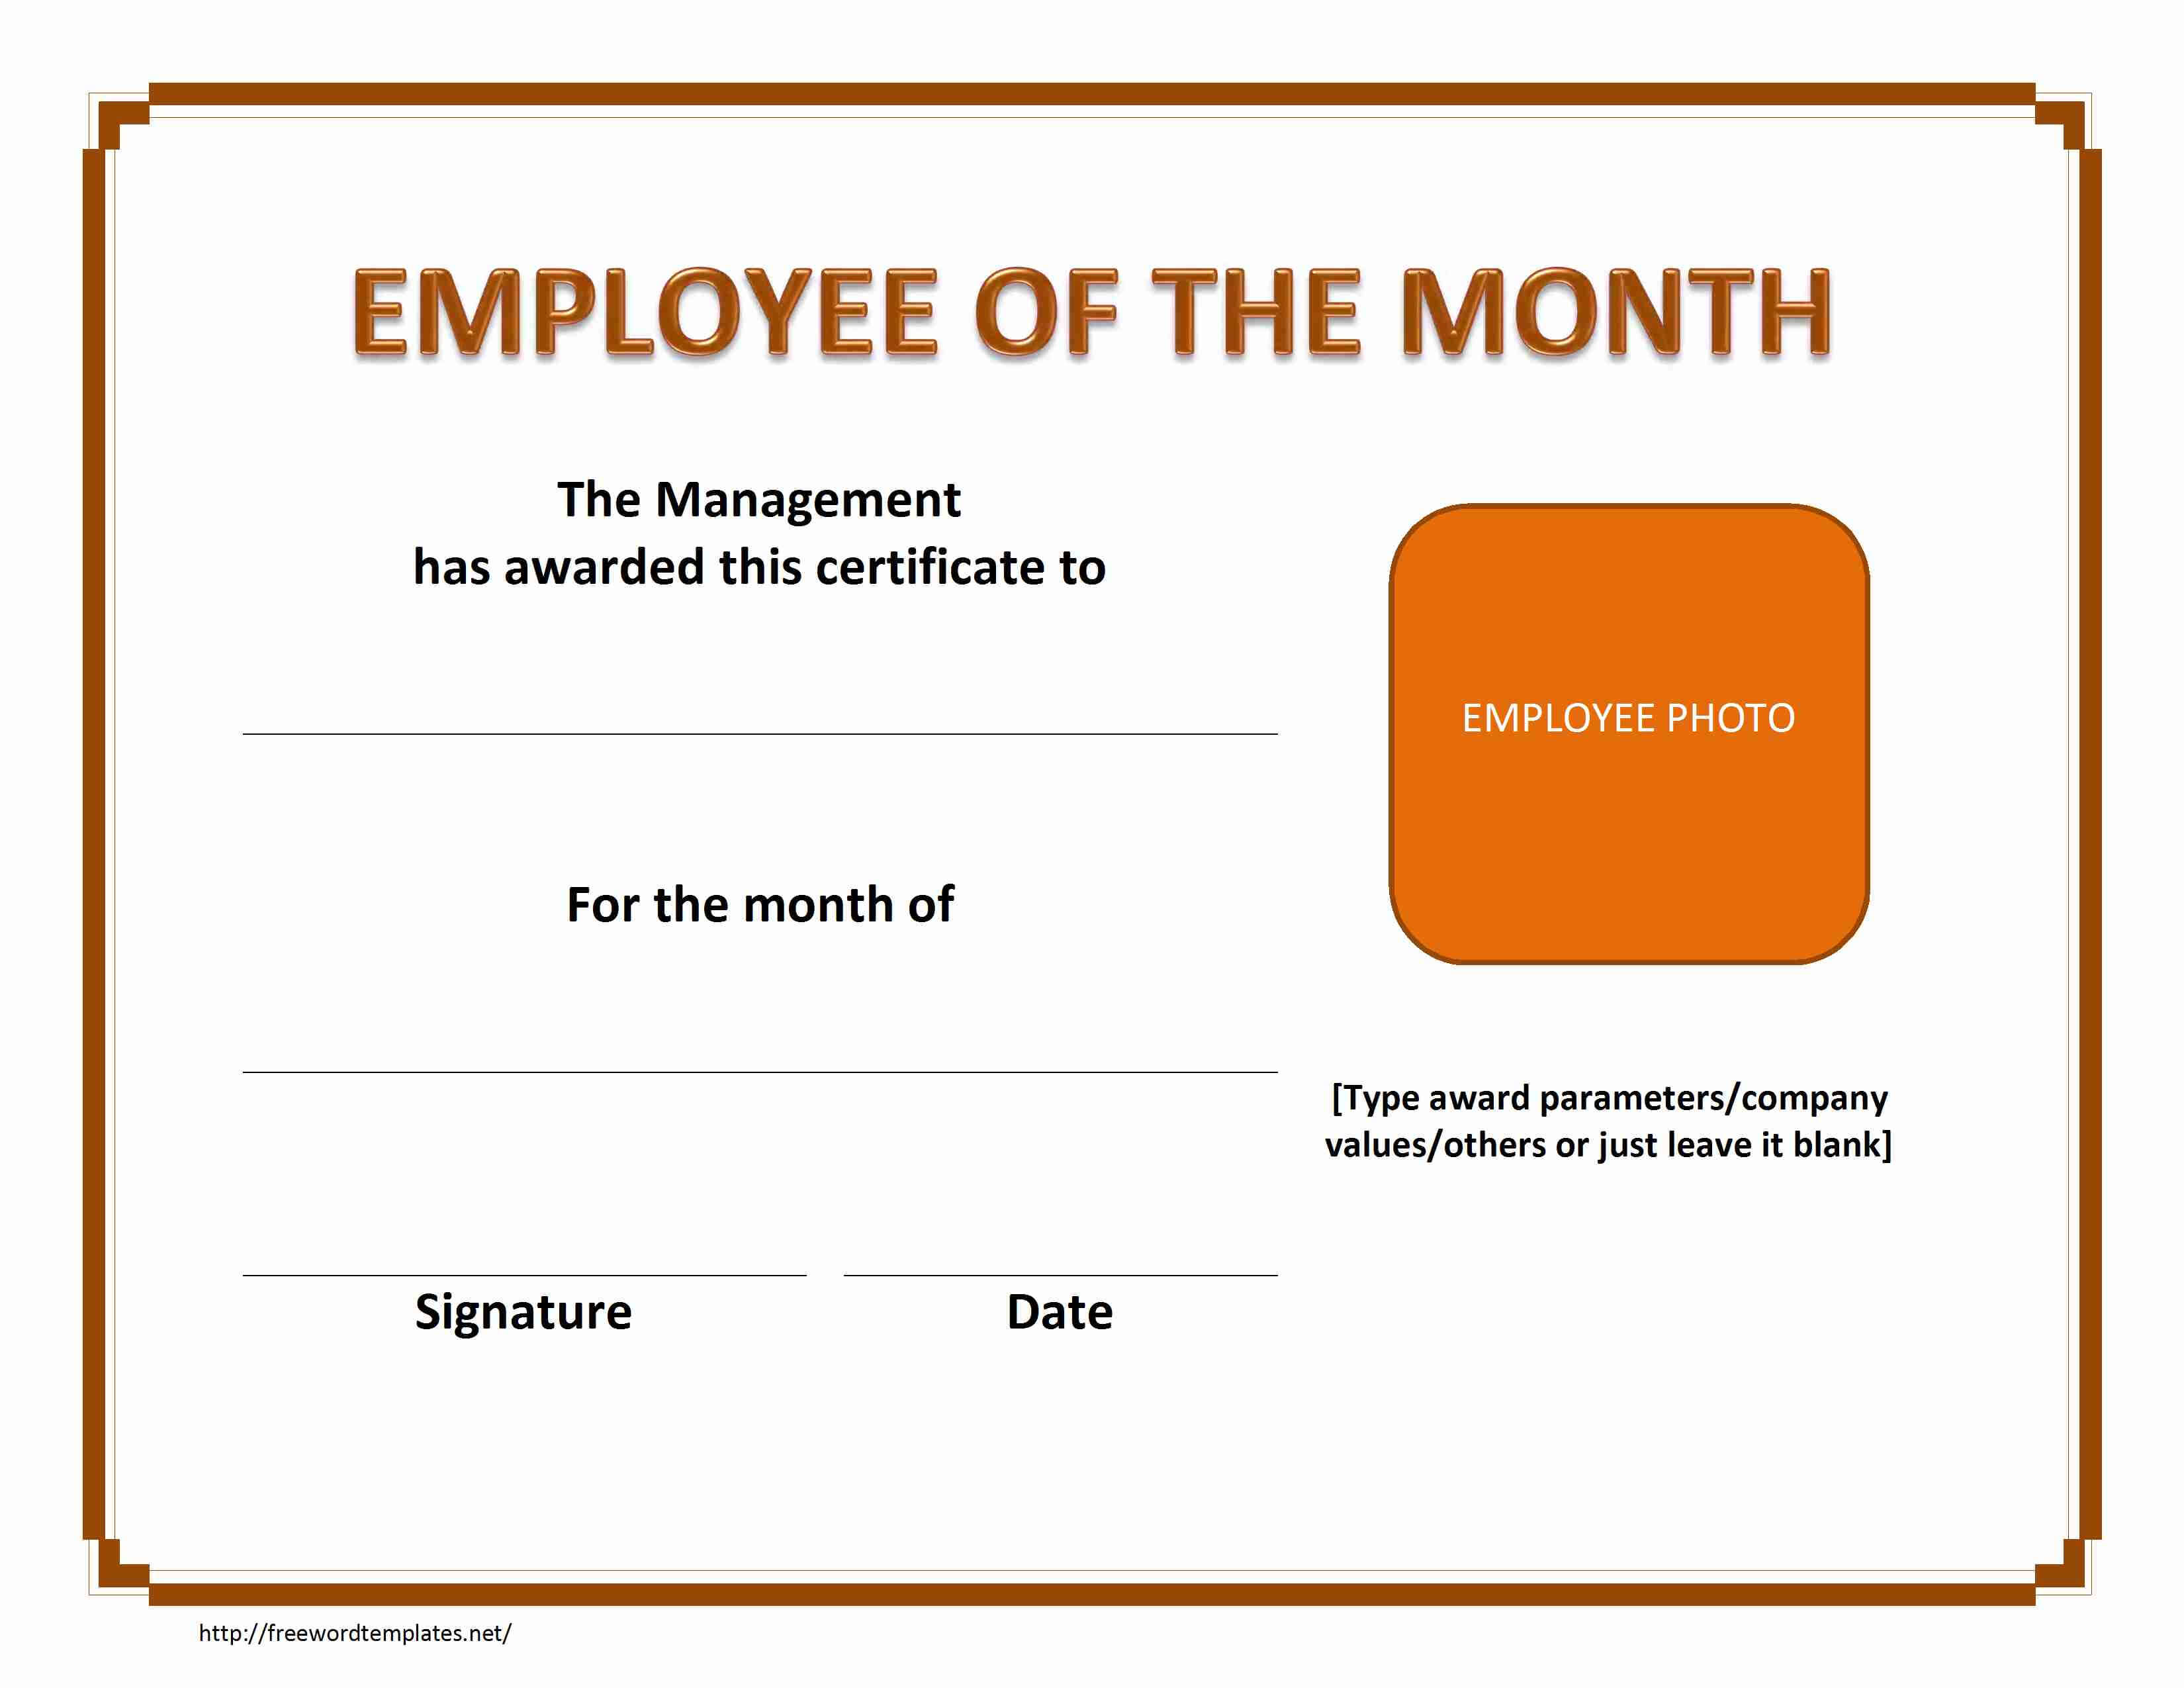 Employee Of The Month Certificate With Regard To Best Employee Award Certificate Templates